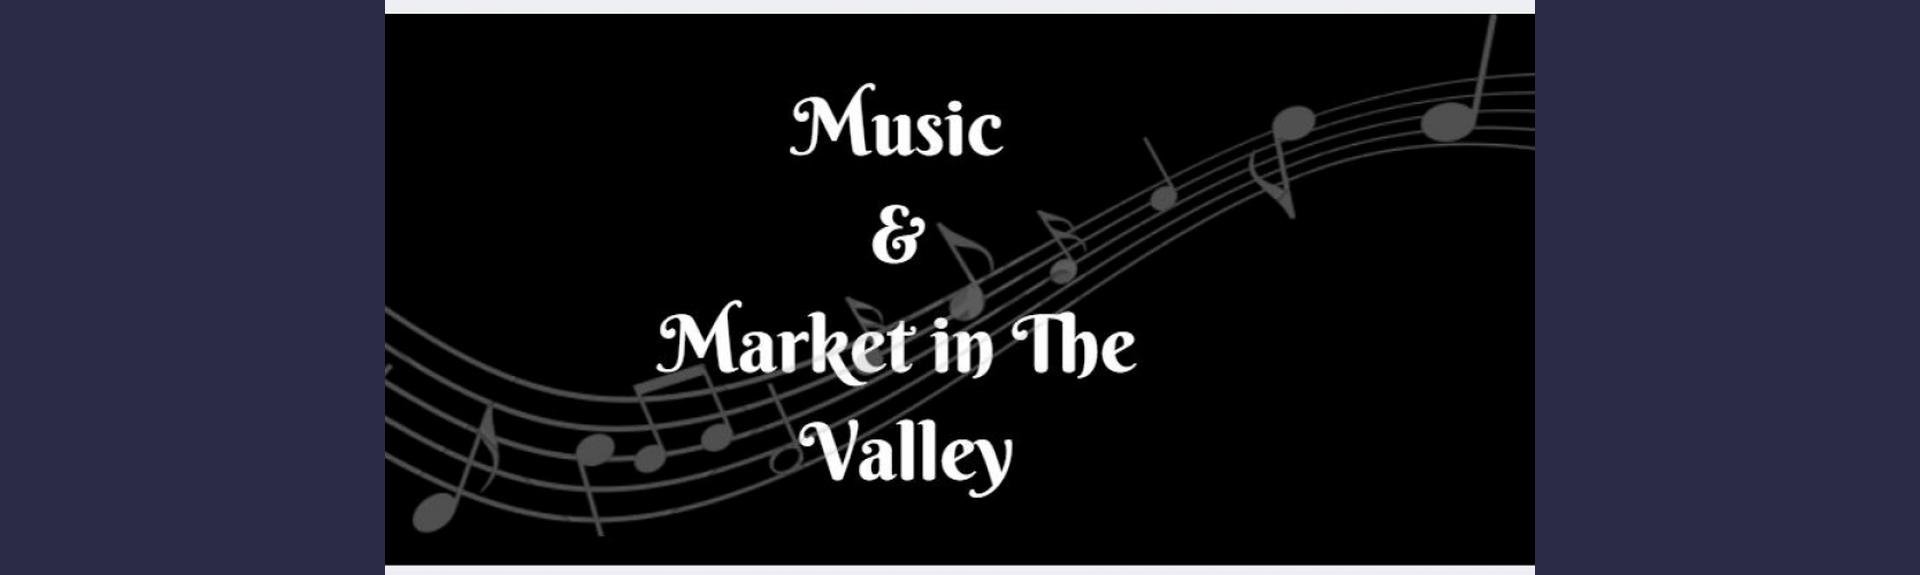 Music and Market in the Valley - Durbanville